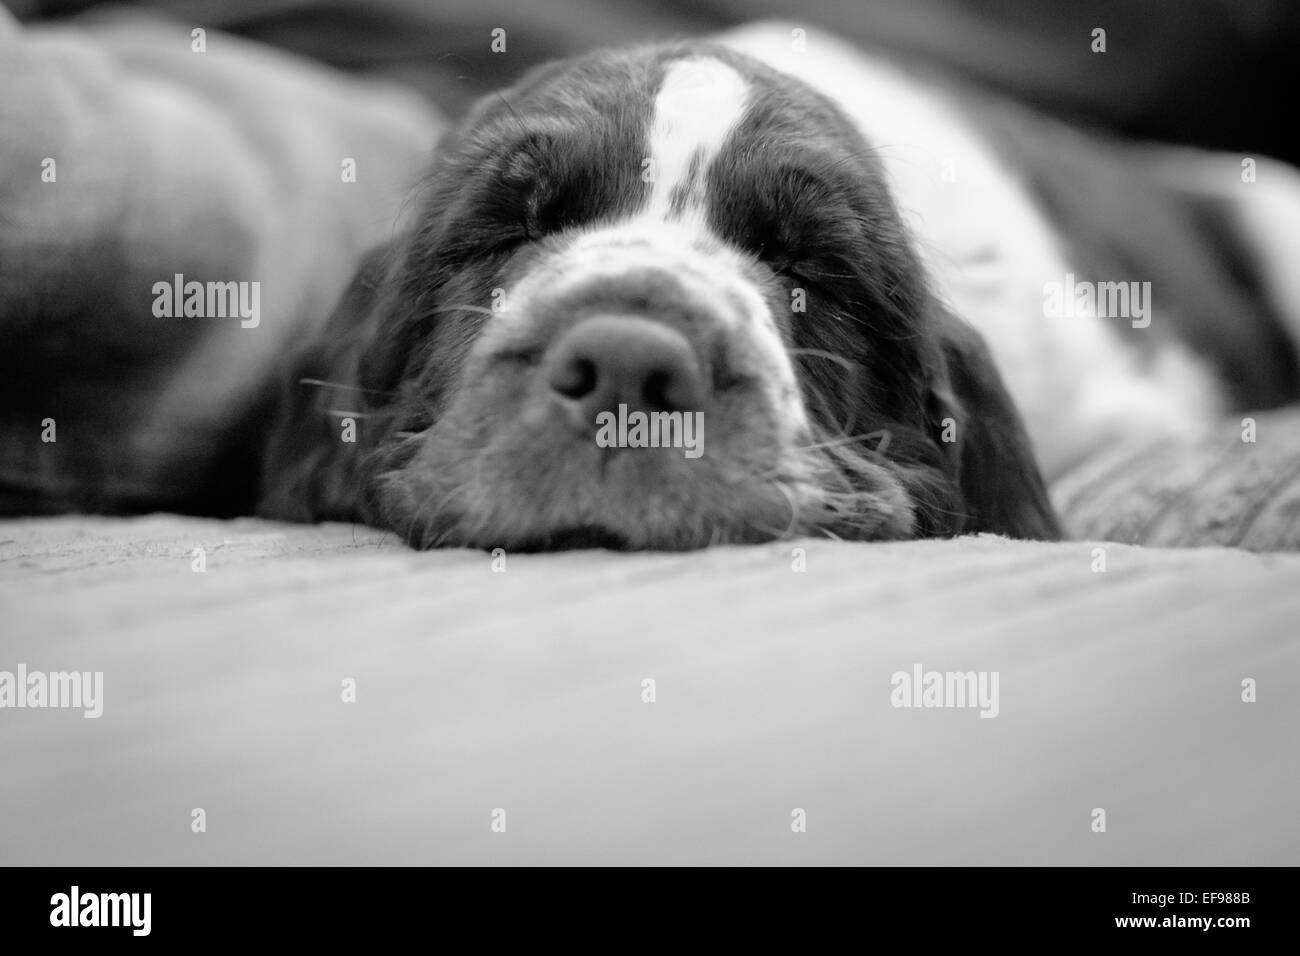 Sleeping springer spaniel puppy in black and white Stock Photo